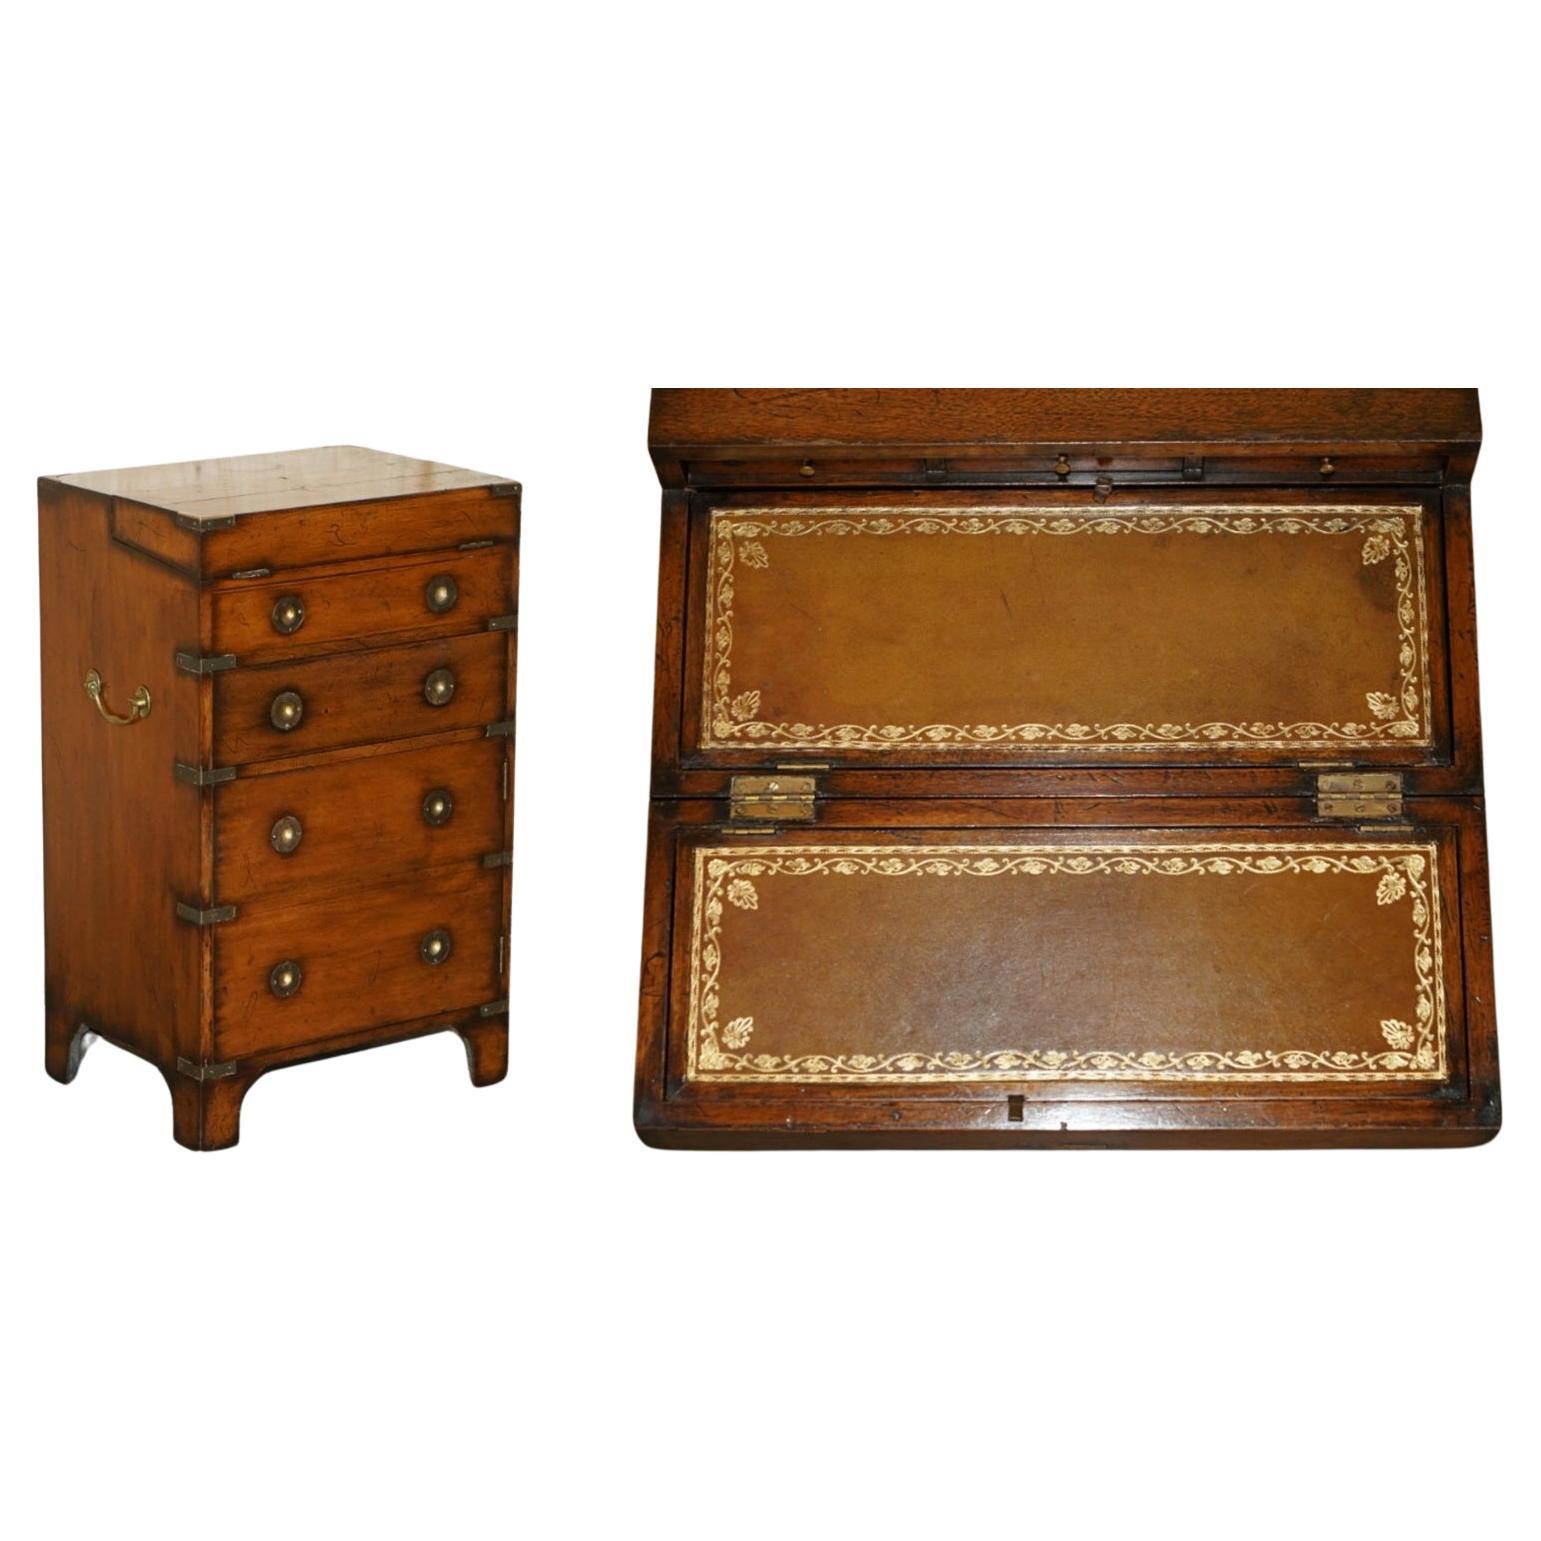 Fine Harrods London Kennedy Chest of Drawers Brown Leather Writing Slope Desk For Sale